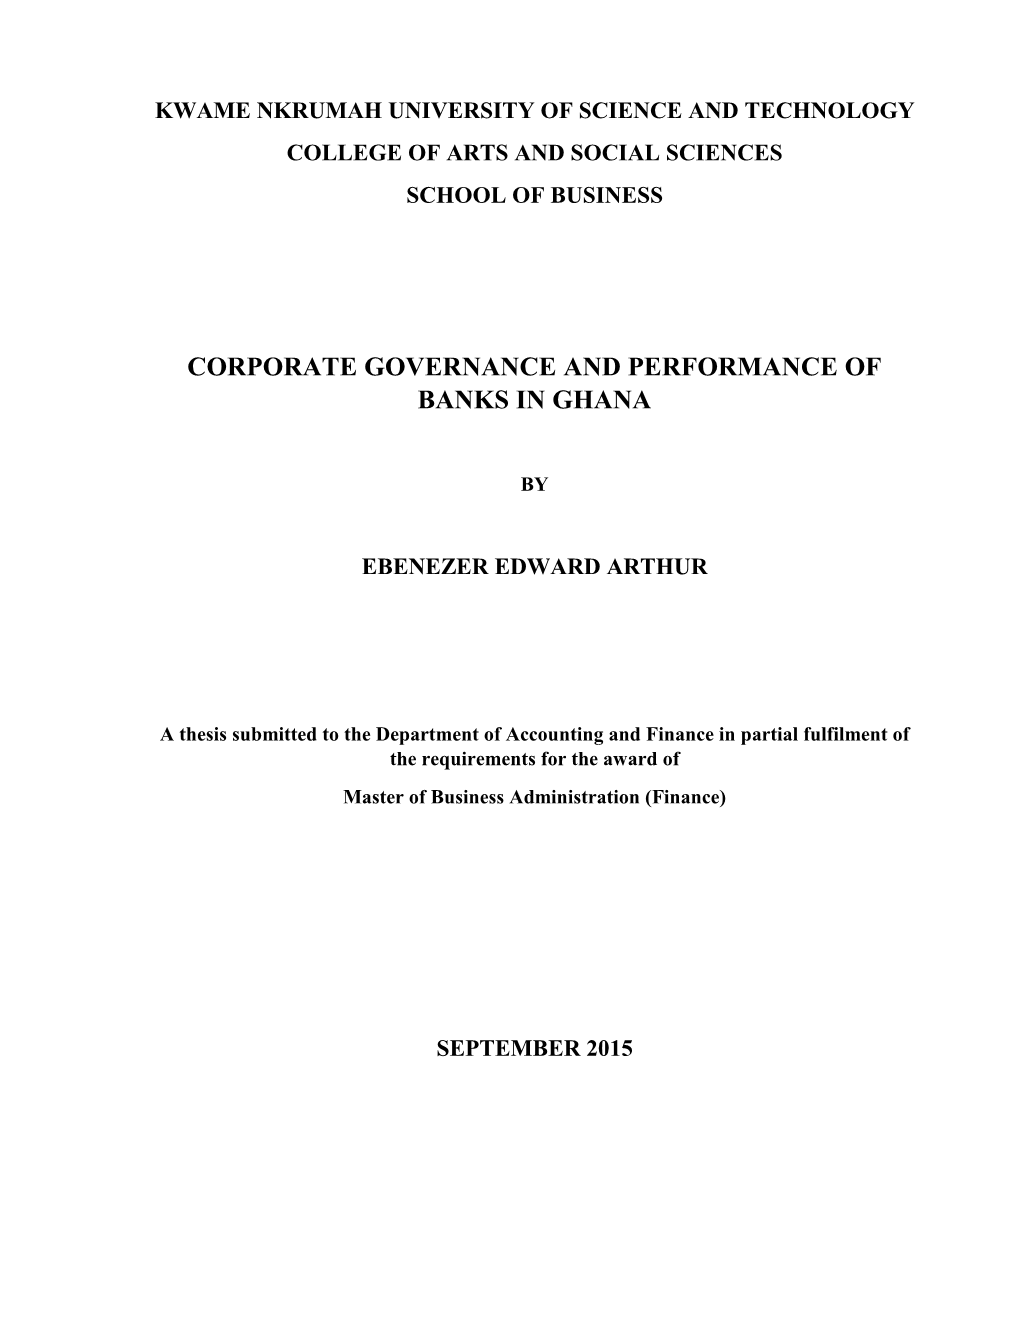 Corporate Governance and Performance of Banks in Ghana